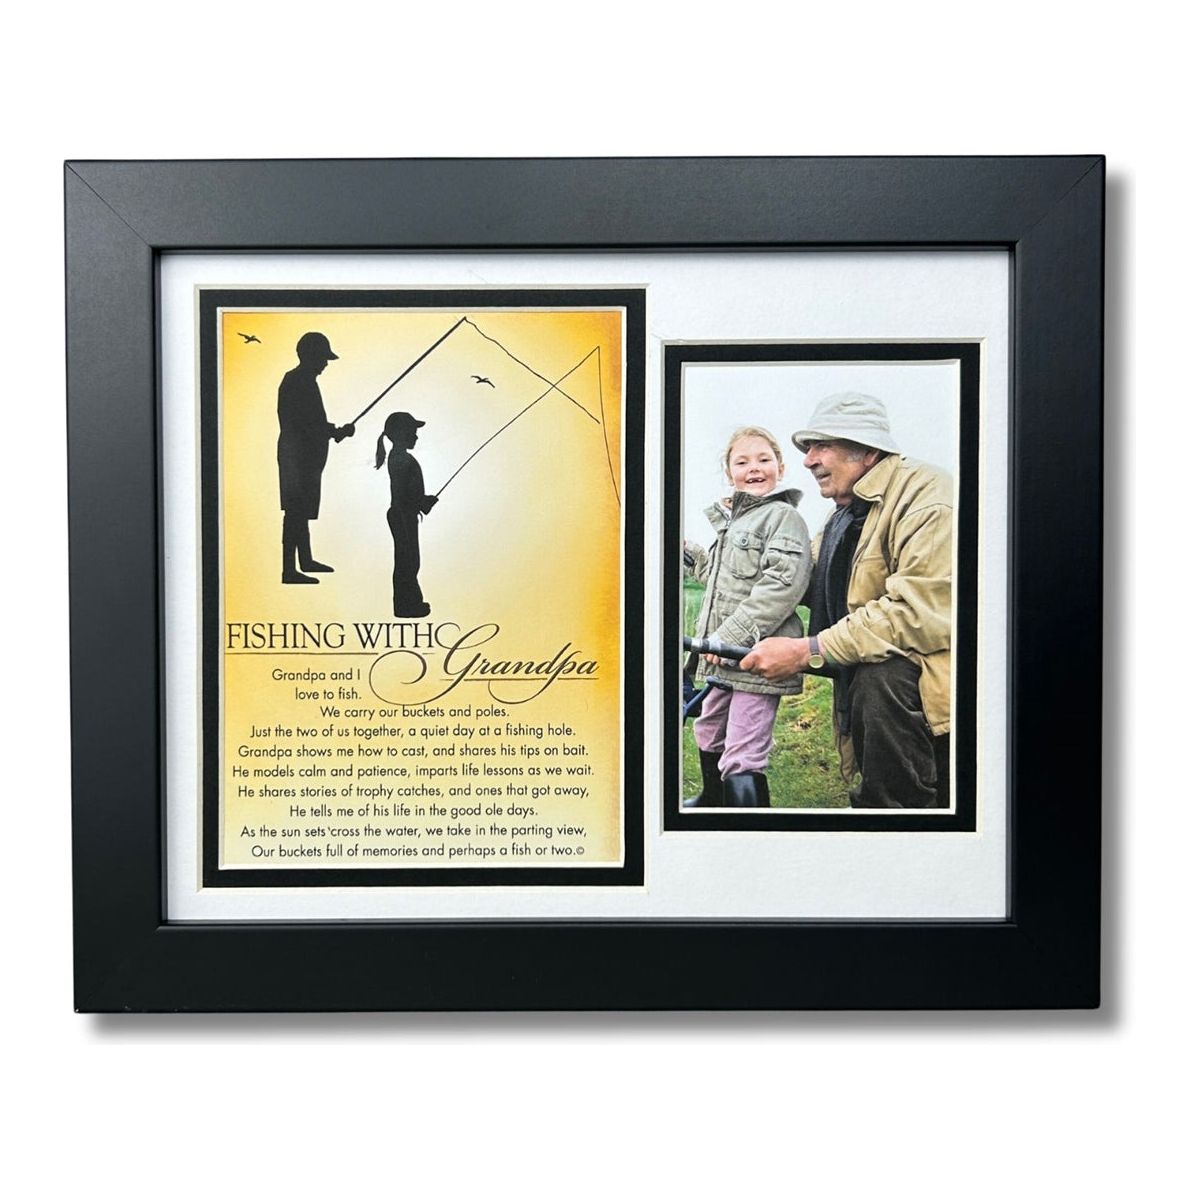 8x10 black frame with white and black double mat, includes &quot;Fishing with Grandpa&quot; artwork with poem and silhoutte of Grandpa and Granddaughter and space for photo.